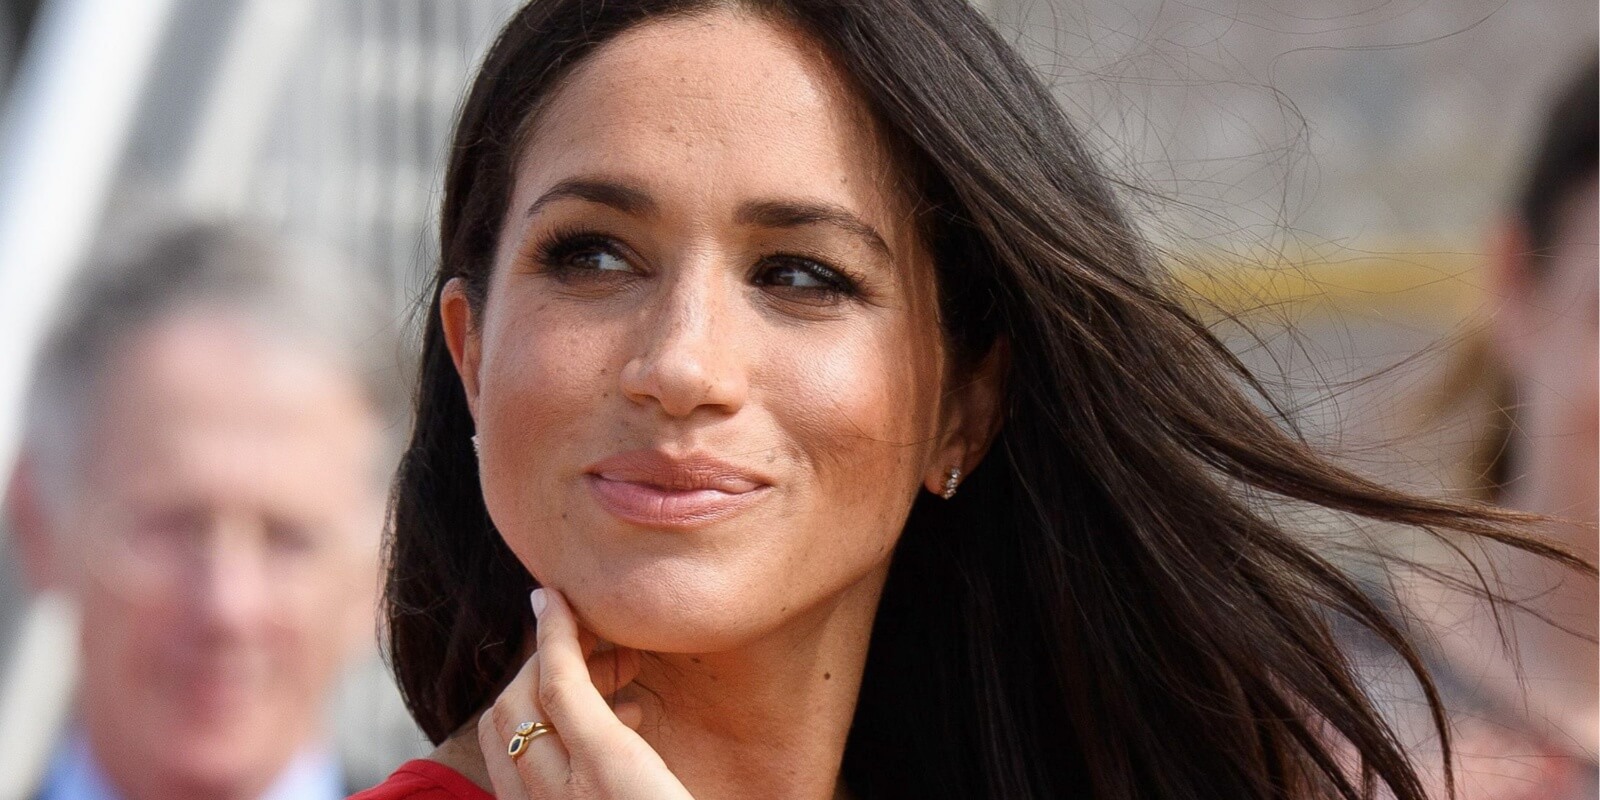 Meghan Markle Broke the Rules for 'Attention' Says Lady Colin Campbell ...